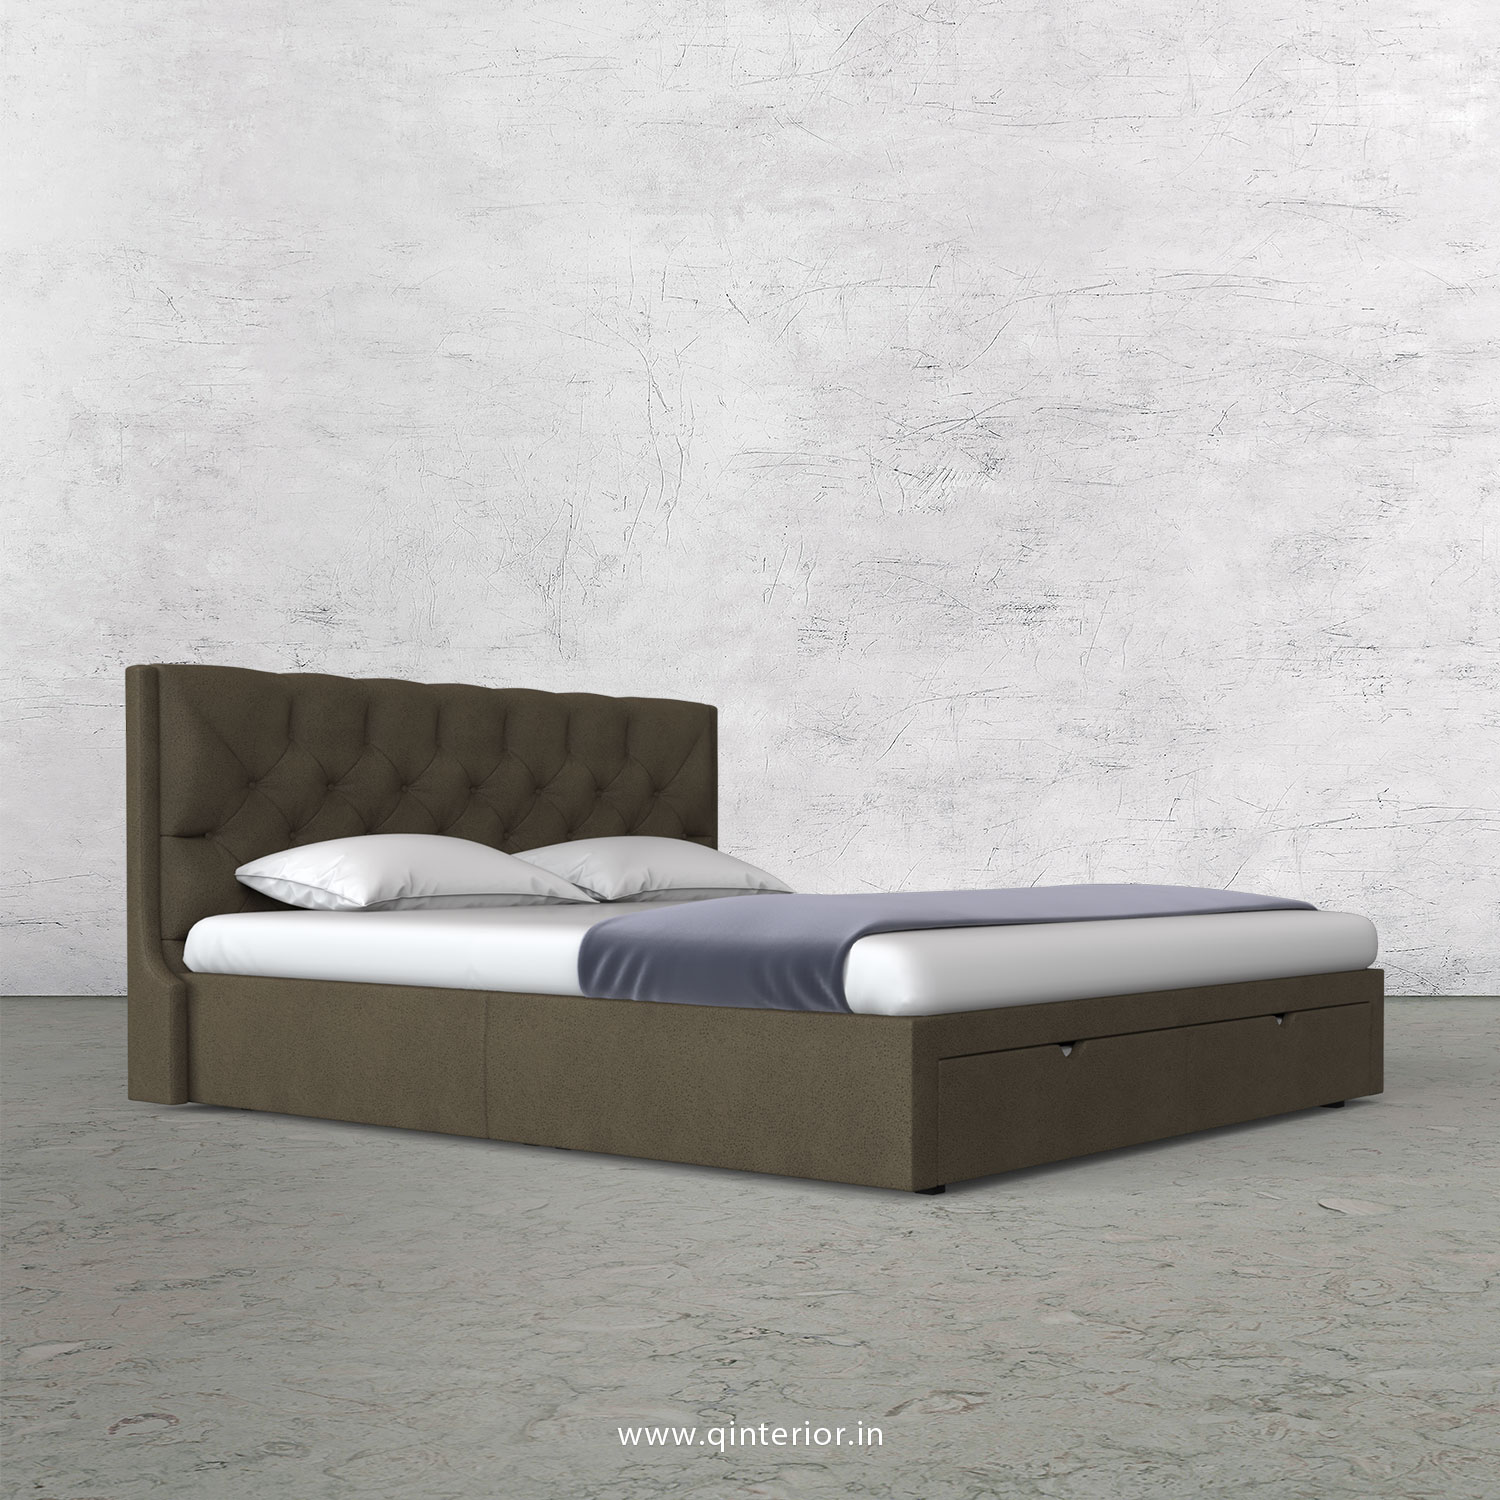 Scorpius King Size Storage Bed in Fab Leather Fabric - KBD001 FL06